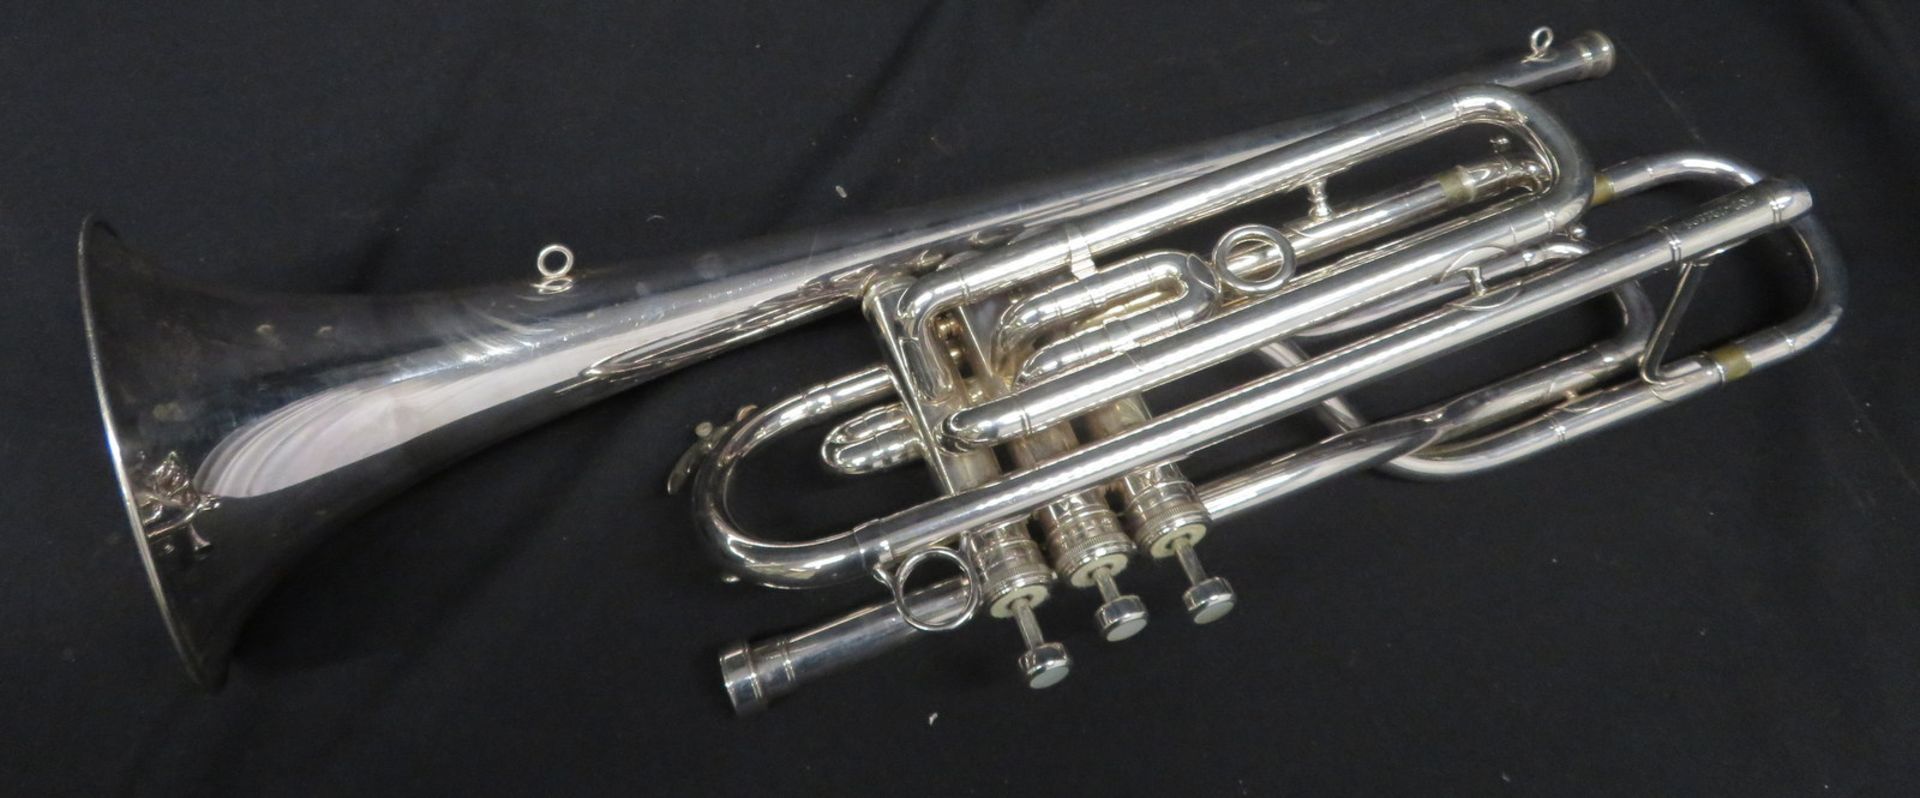 Boosey & Hawkes Besson 700 London tenor fanfare trumpet with case. Serial number: 707-721126. - Image 16 of 18